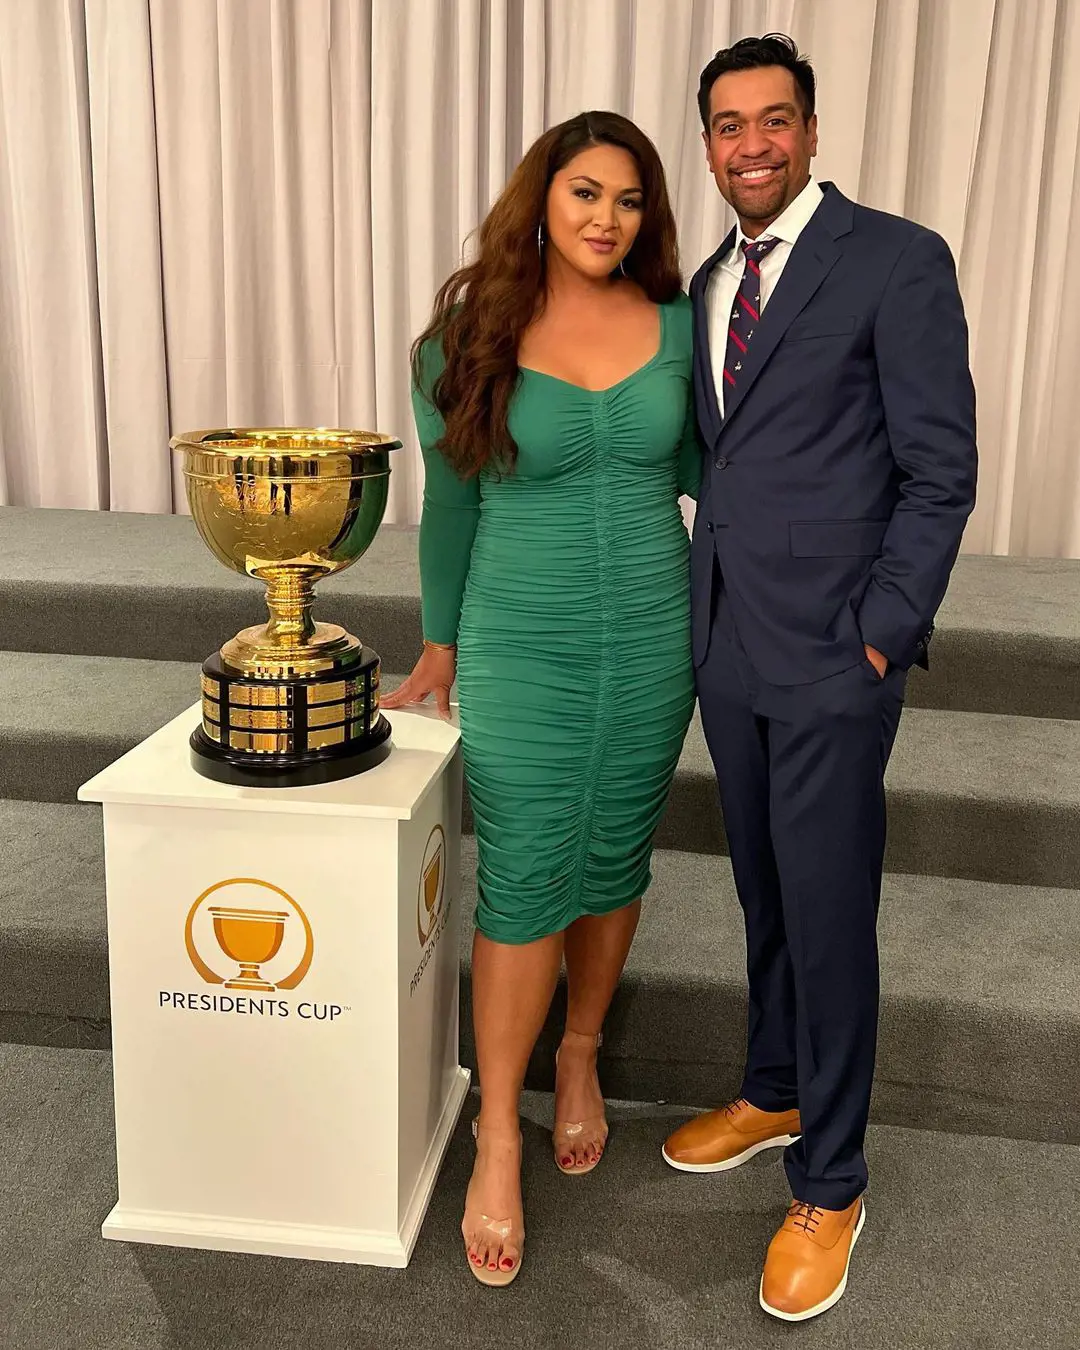 Alayna looking pretty in a green outfit with Tony during President Cup 2022. 